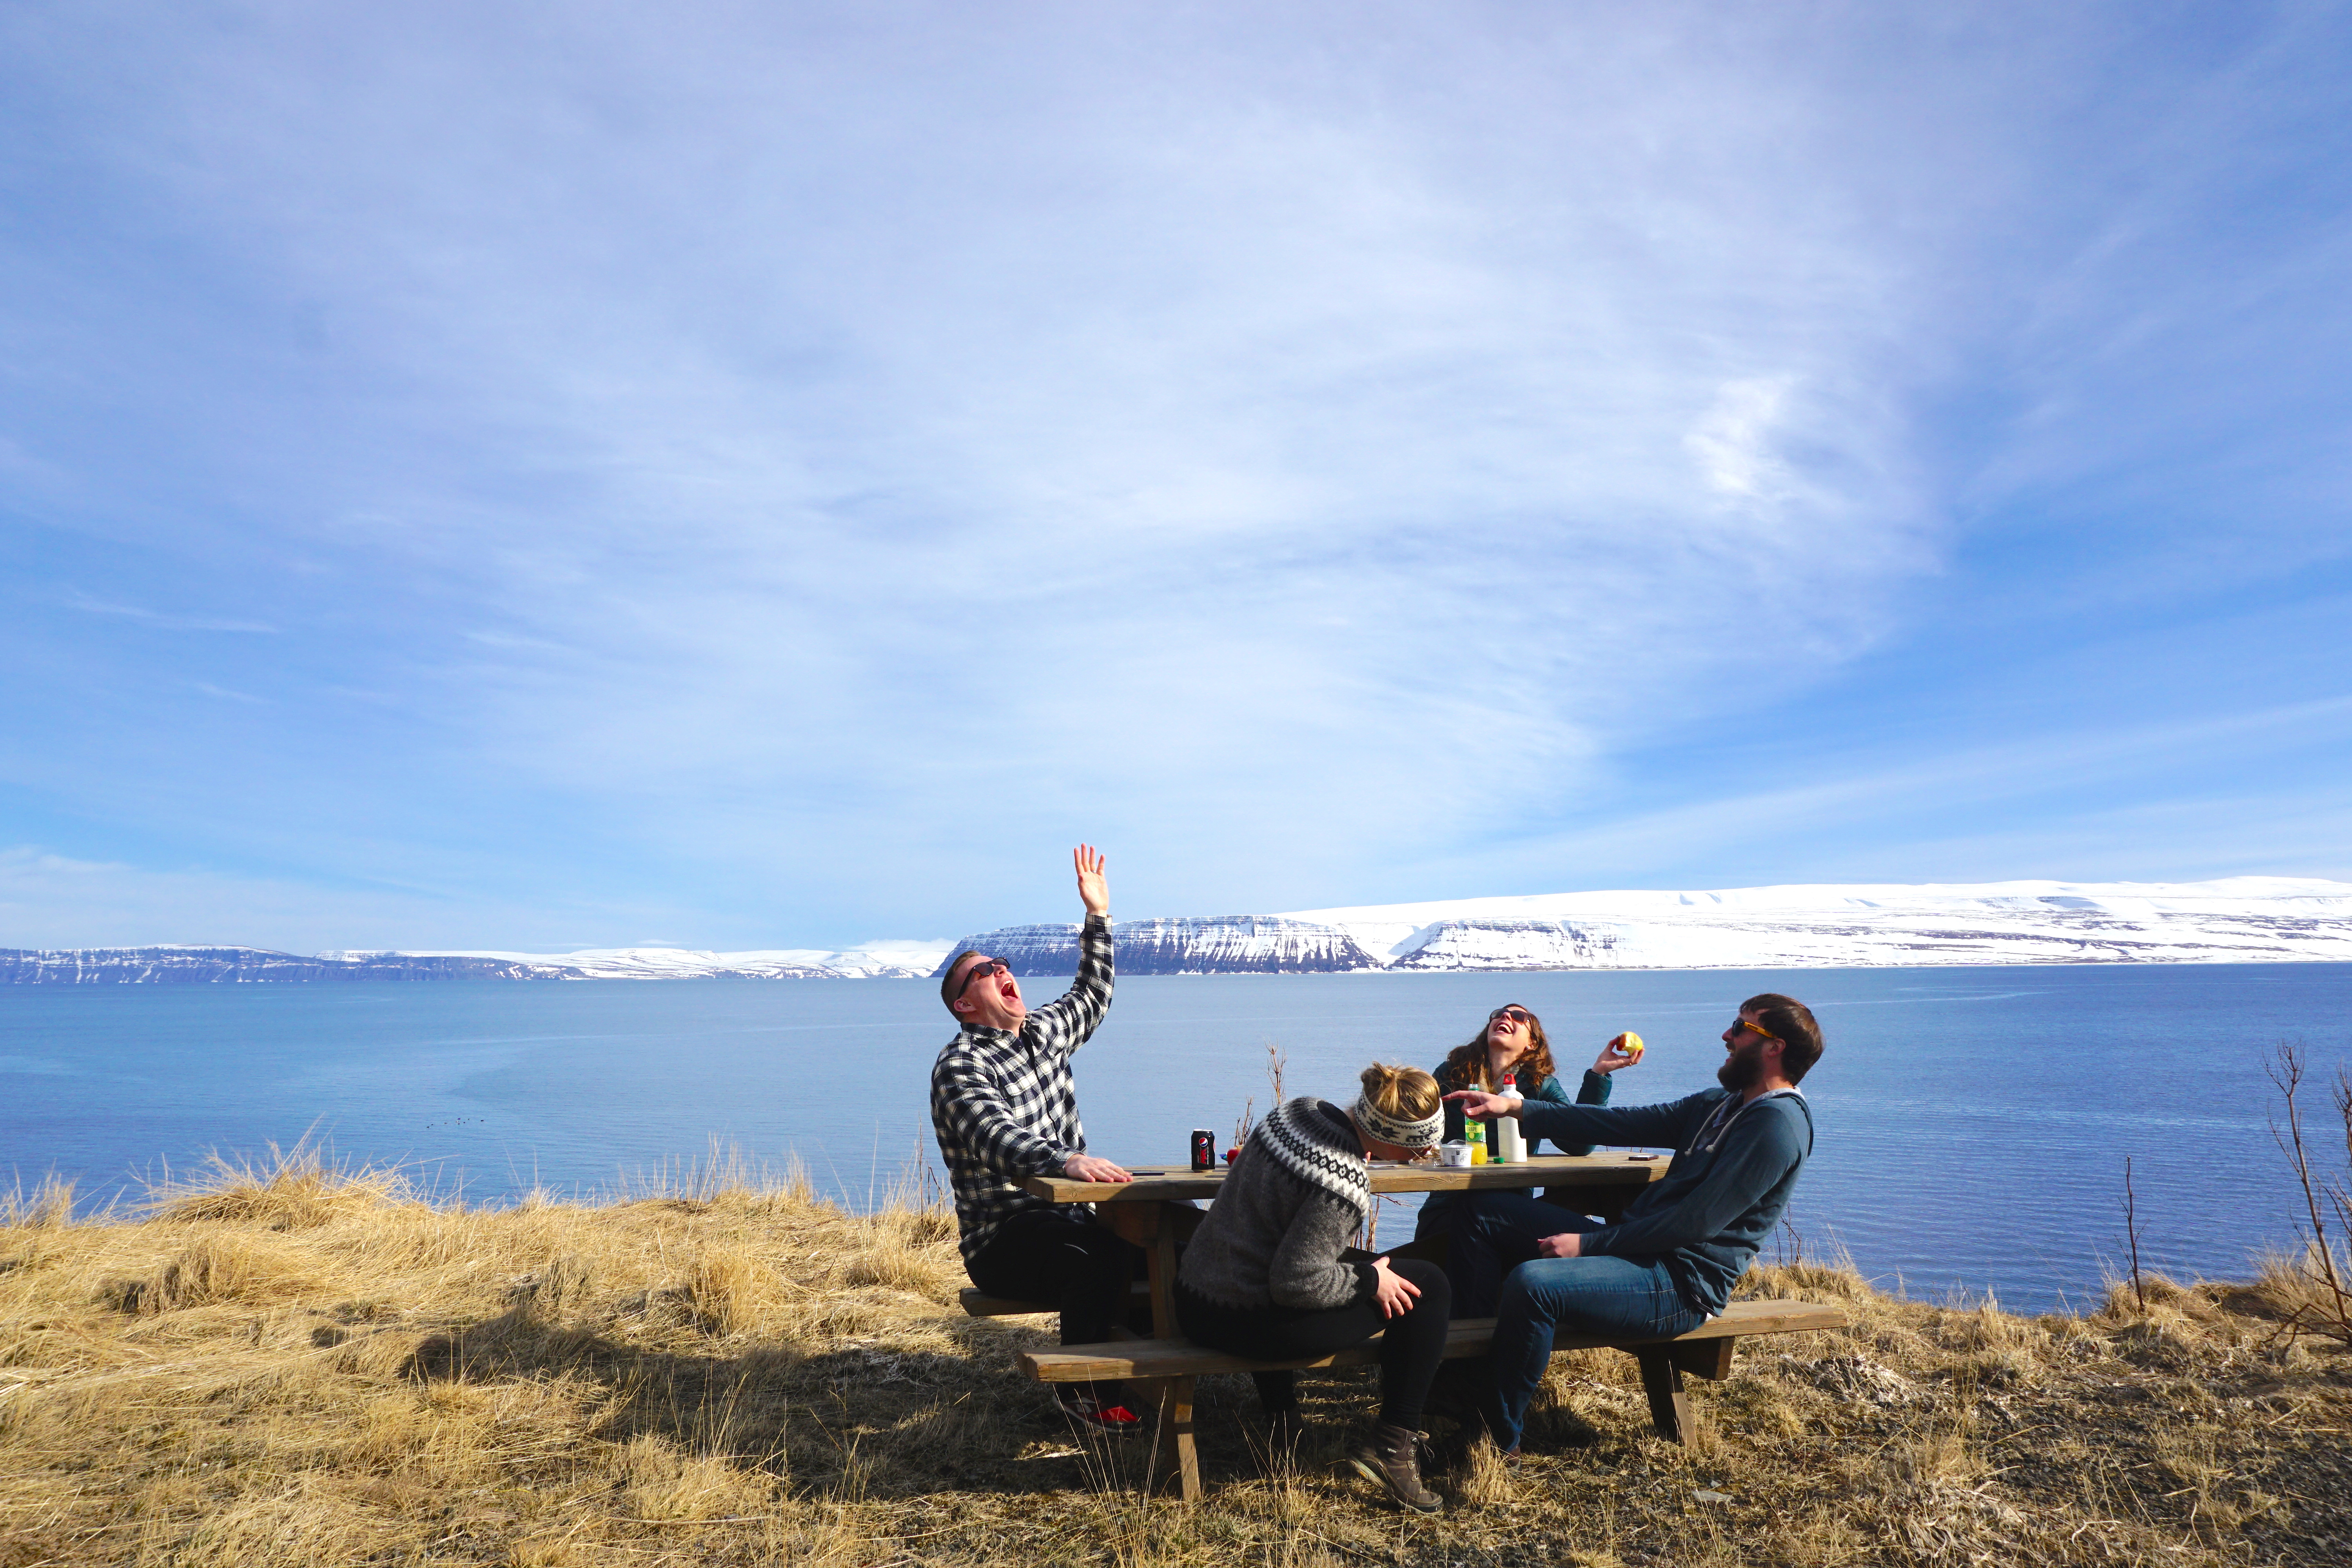 Best picnic spot award! What to do and see in the Westfjords, Iceland + Video! | Life With a View